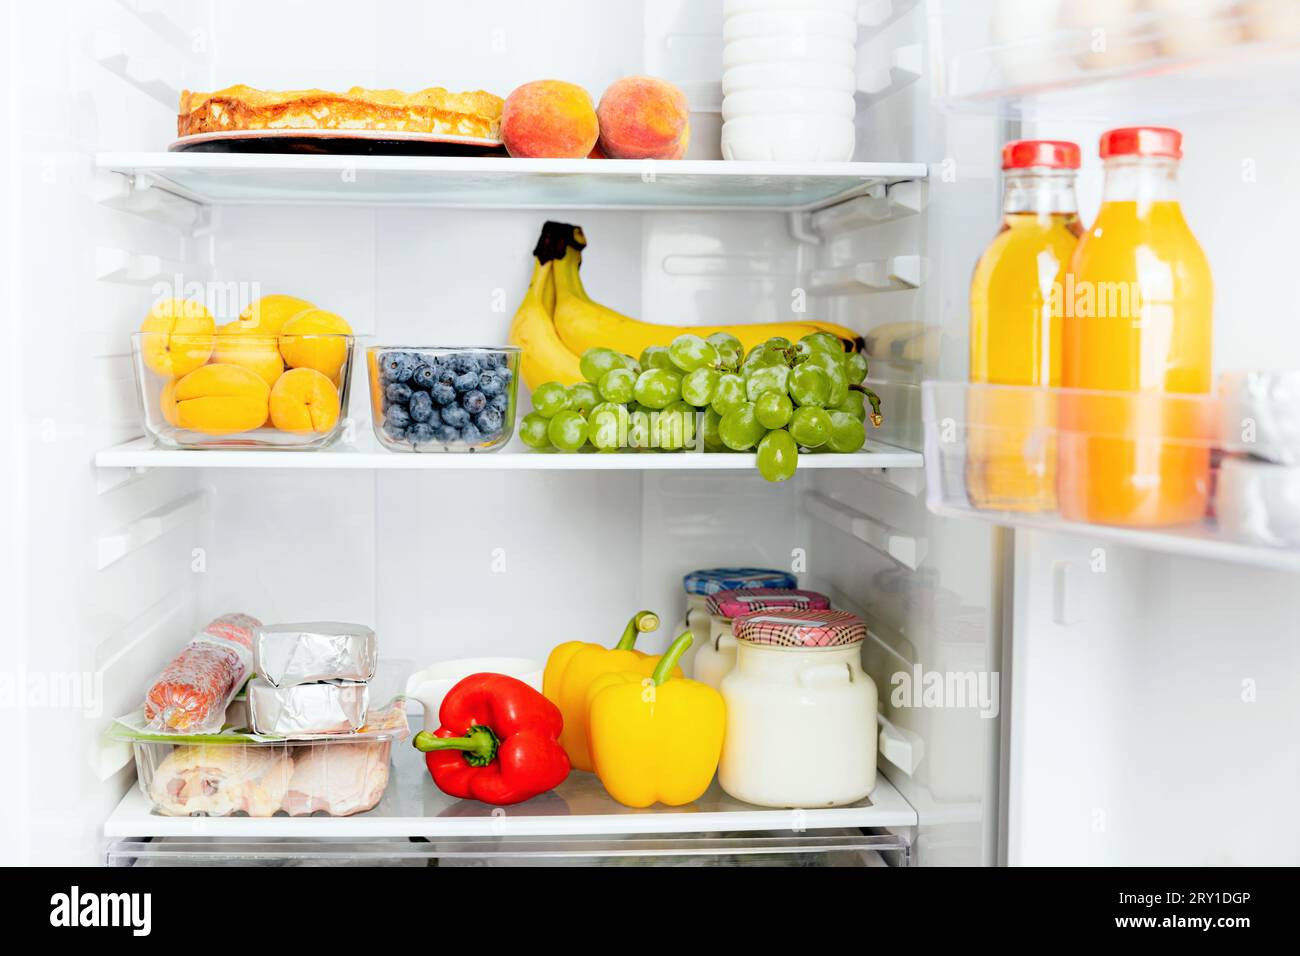 Front View of open two door fridge or refrigerator door filled with fresh fruits, vegetables, juice, full of healthy food items and ingredients inside Stock Photo